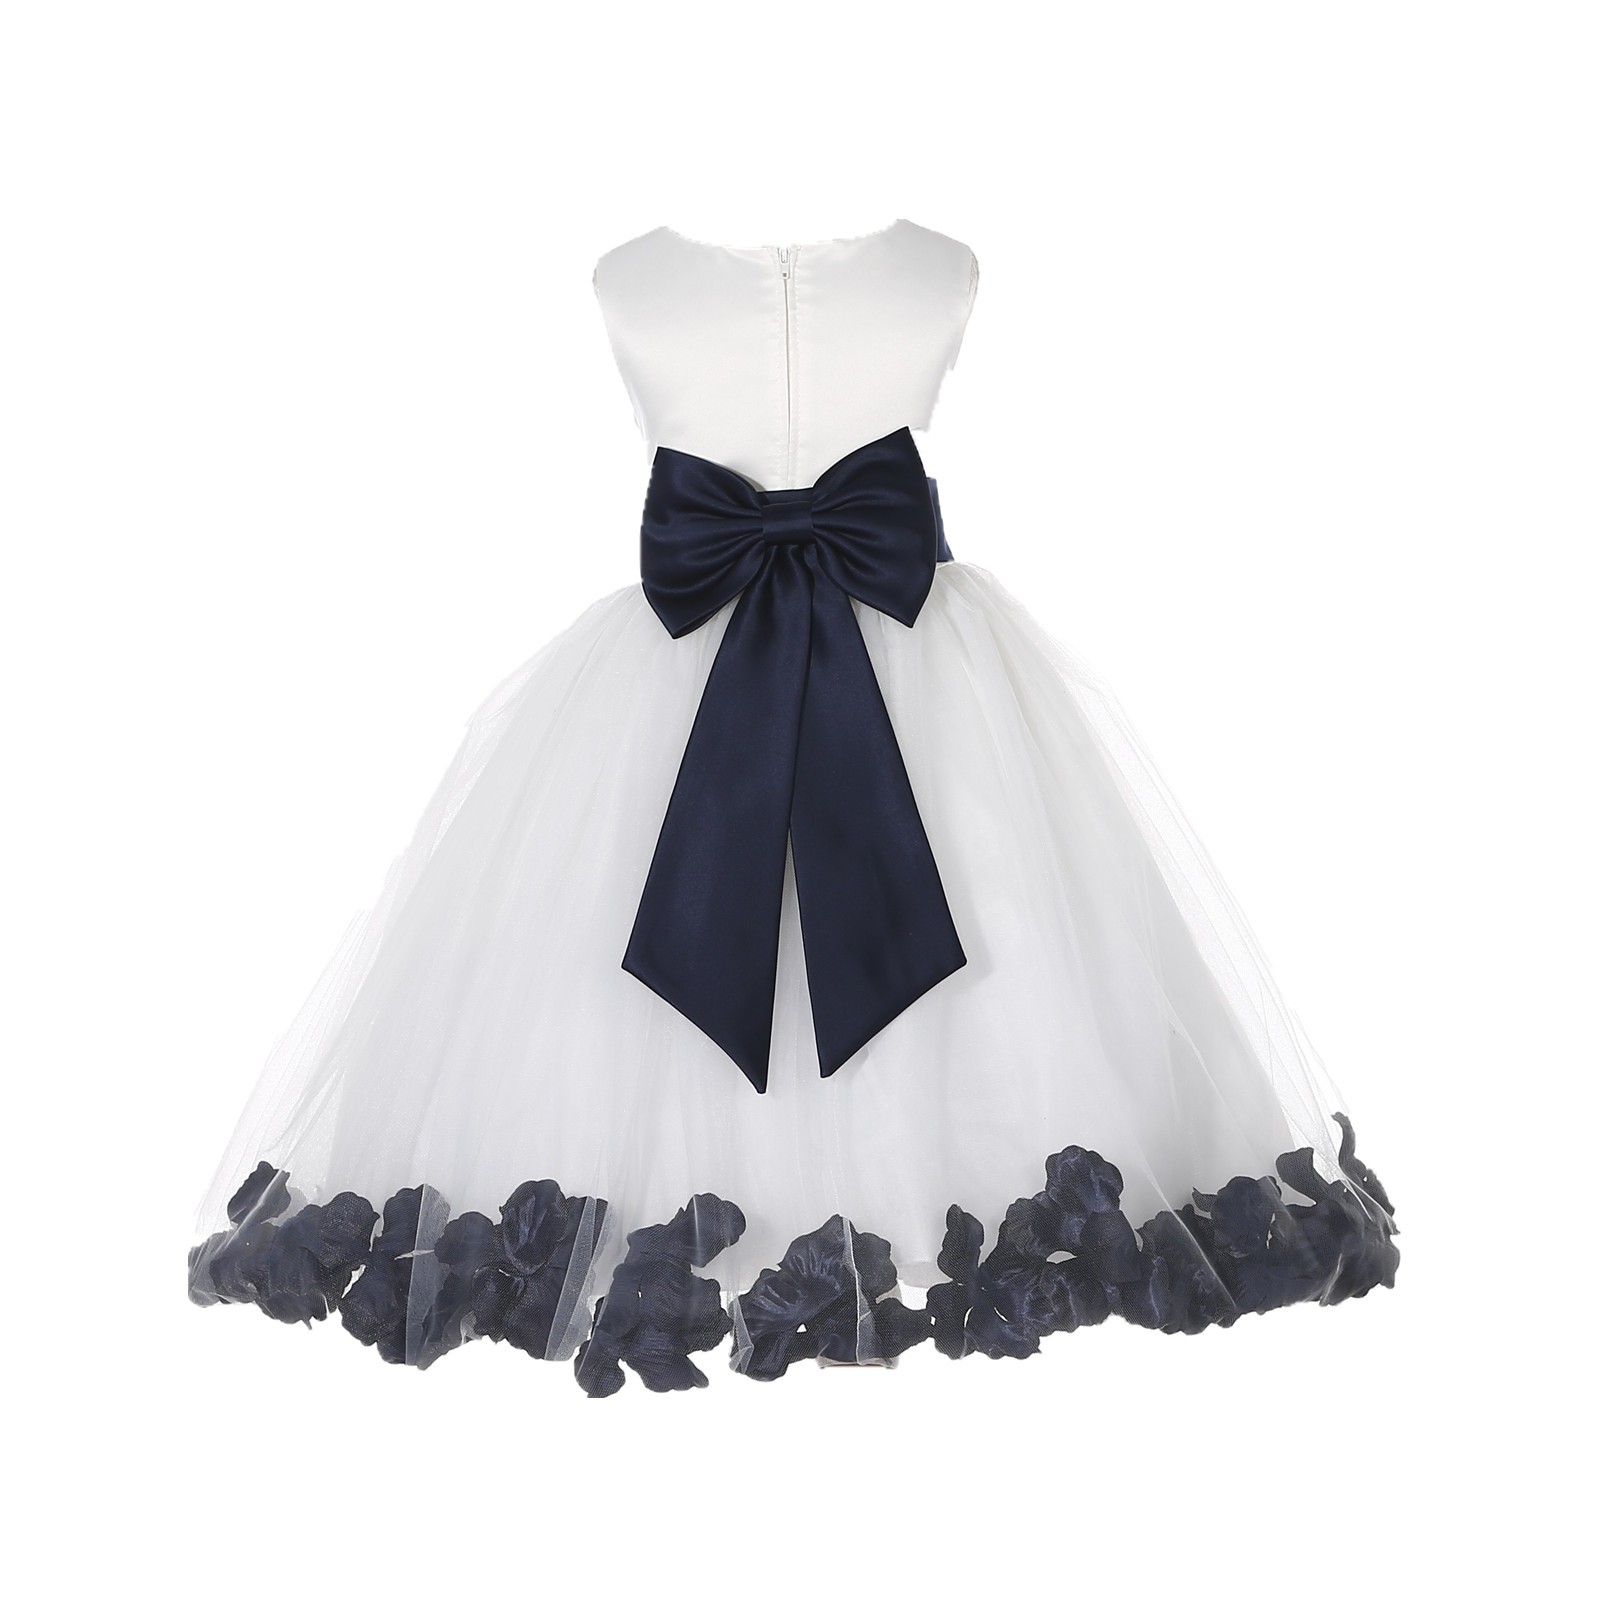 Ivory/Marine Tulle Rose Petals Flower Girl Dress Pageant 302T